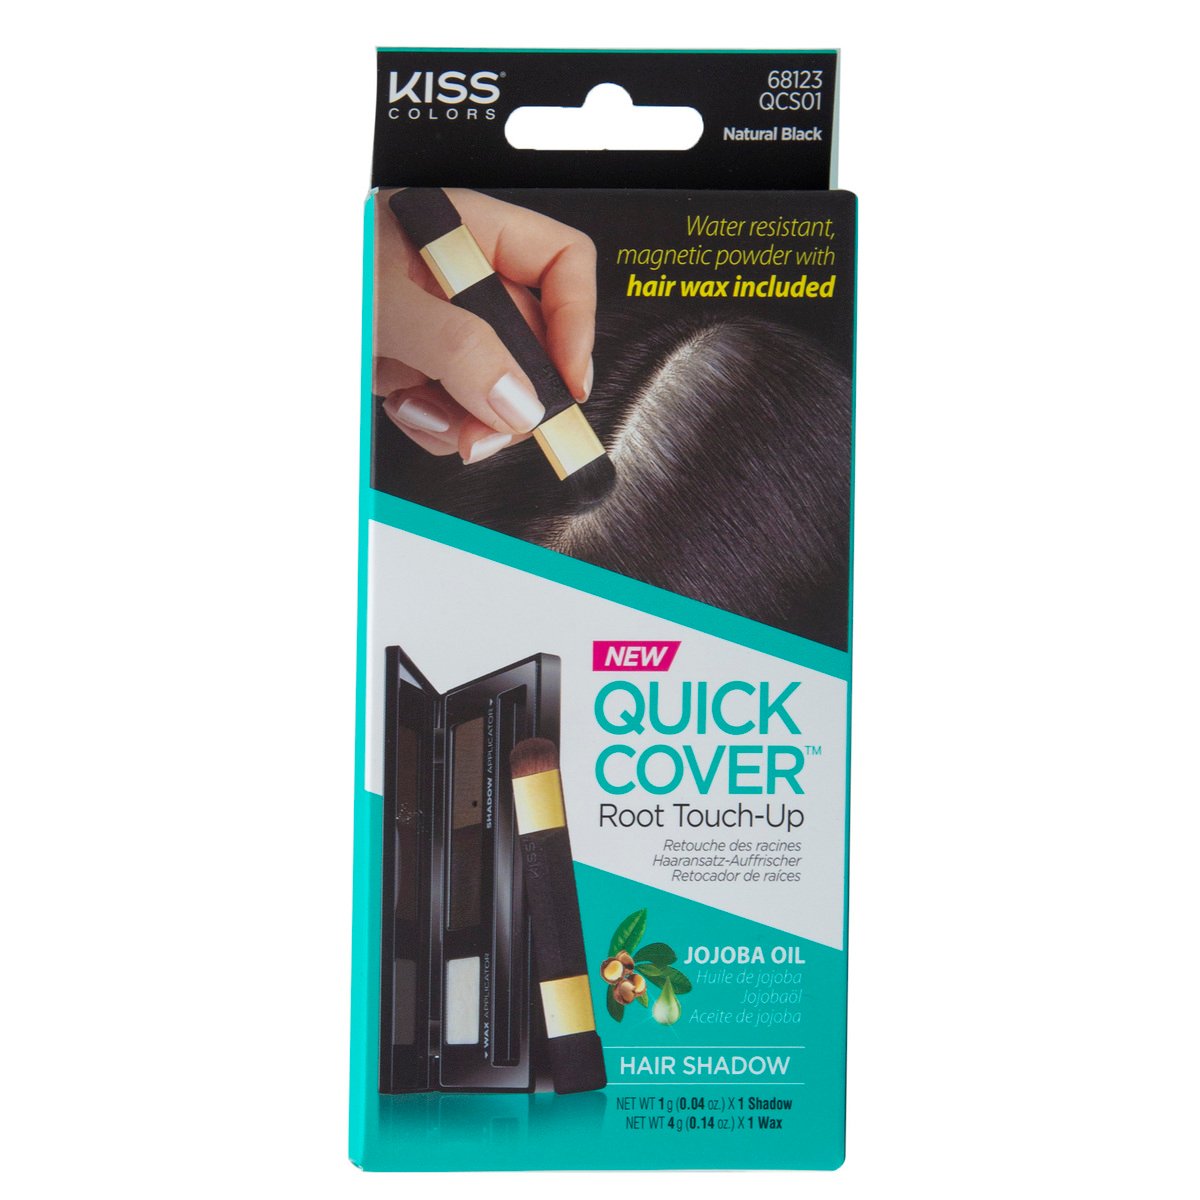 Kiss Quick Cover Root Touch Up Jojoba Oil Natural Black, 1 pkt